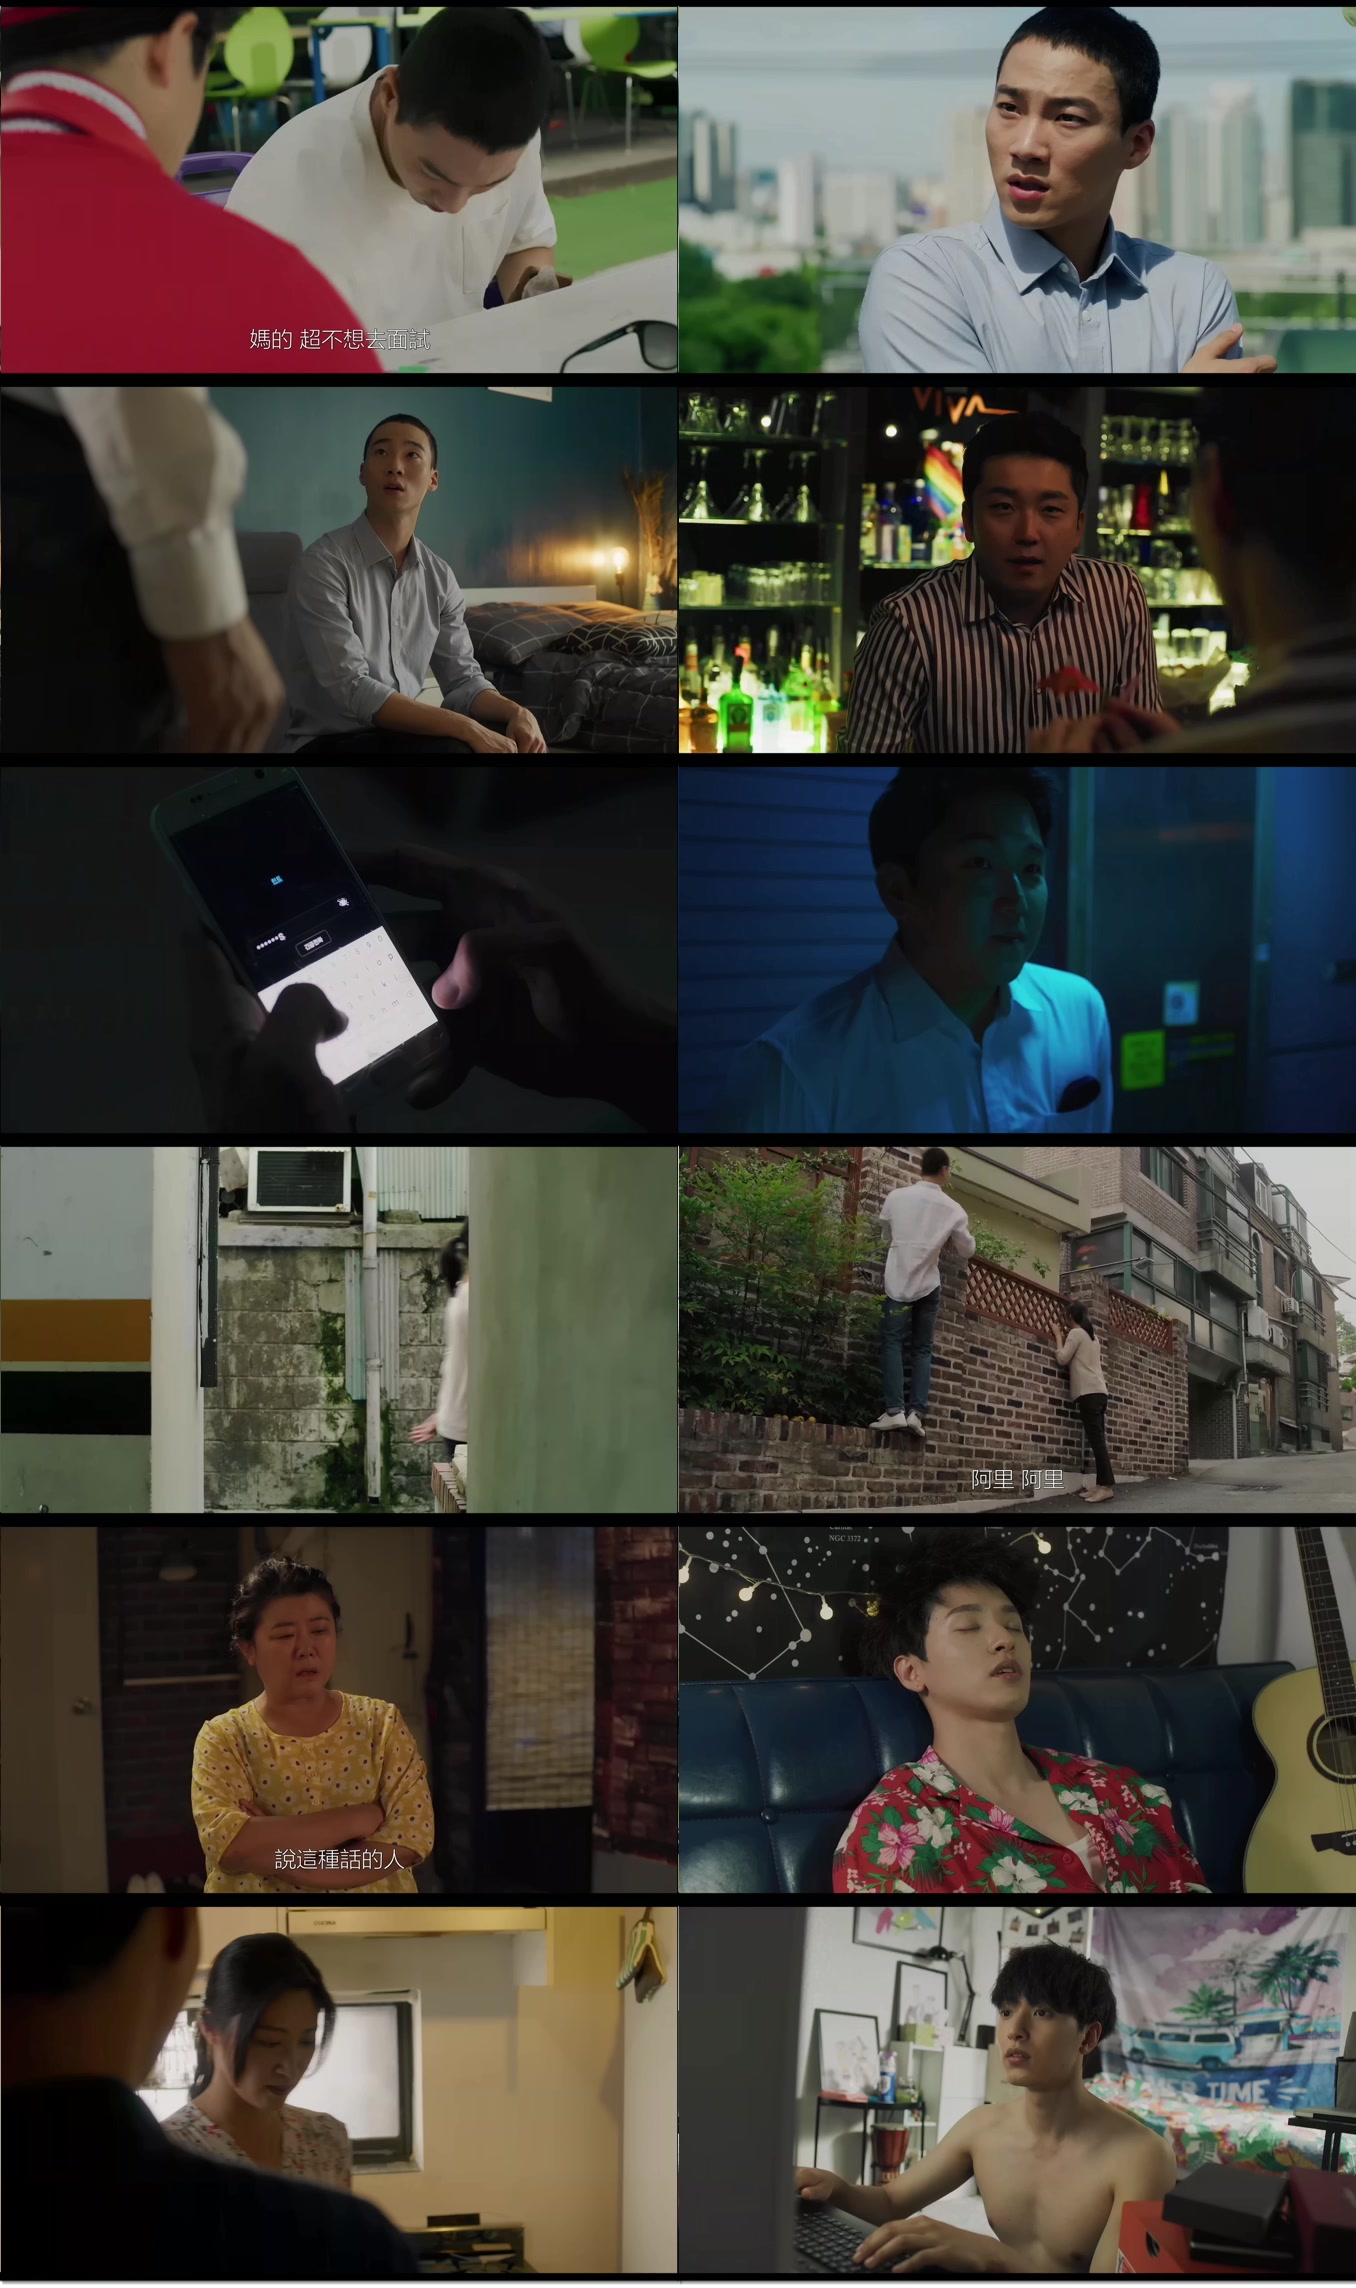 Made.on.the.Rooftop.2020.1080p.WEB-DL.AAC2.0.H.264-CTRLWEB.mkv